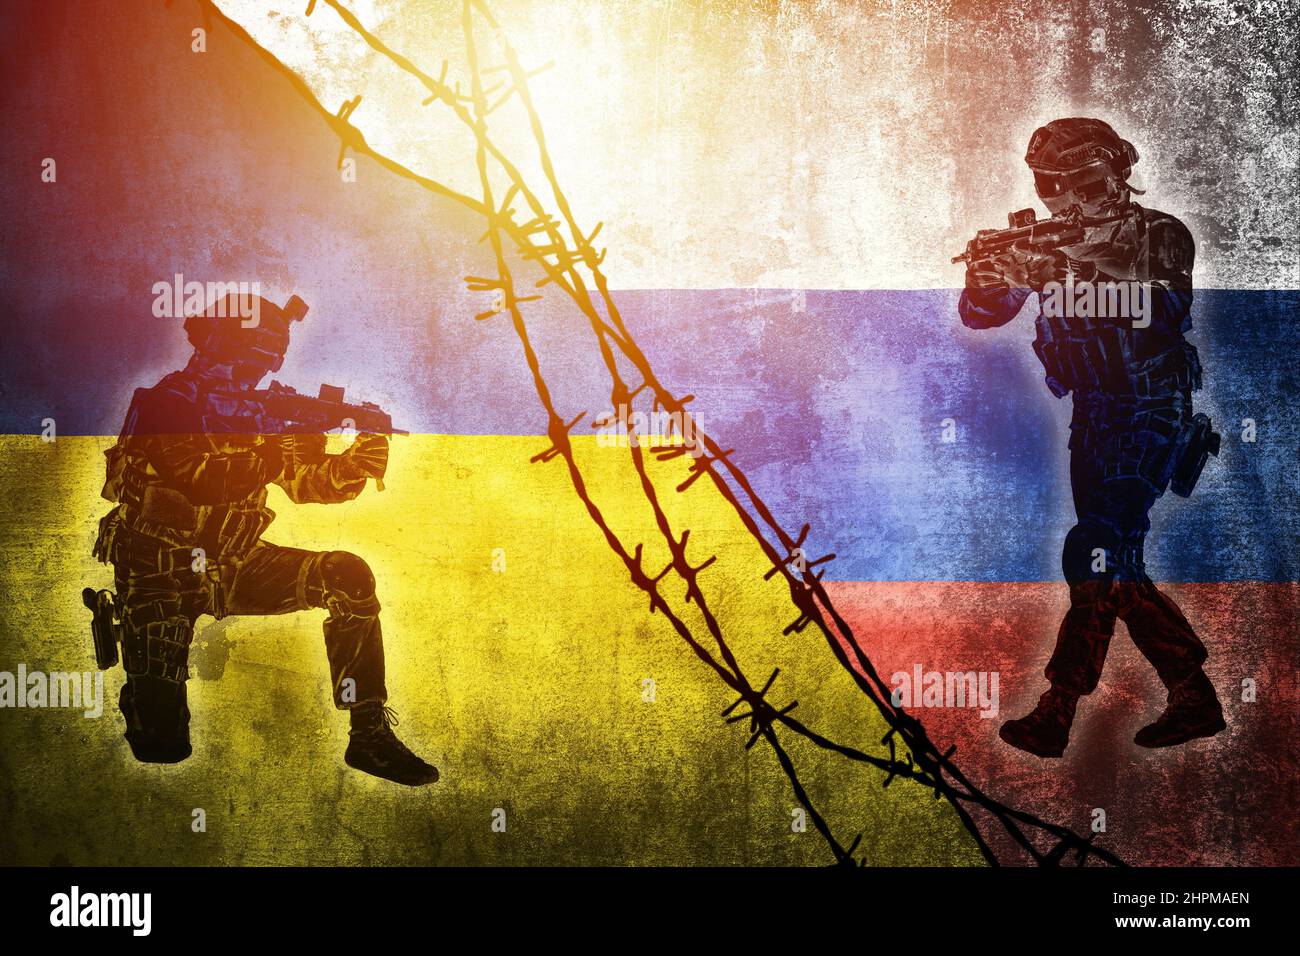 Grunge flags of Russian Federation and Ukraine divided by barb wire with soliders pointing weapon at each other sun haze illustration, concept of tens Stock Photo